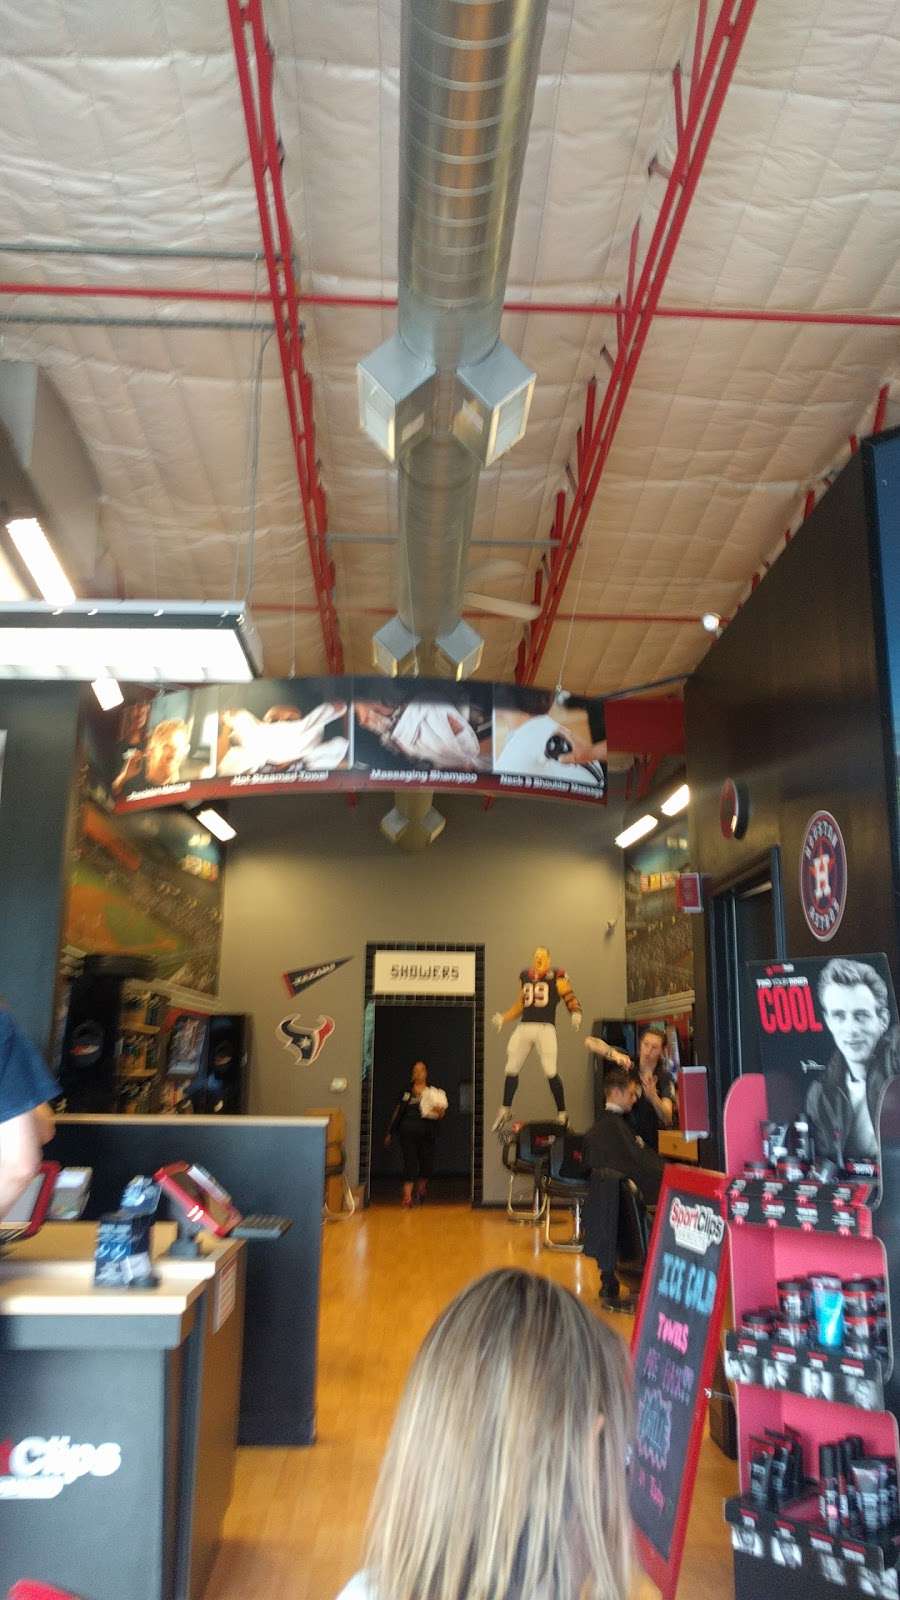 Sport Clips Haircuts of The Woodlands-College Park Center | 3026 College Park Dr Ste. D, The Woodlands, TX 77384, USA | Phone: (936) 273-1754